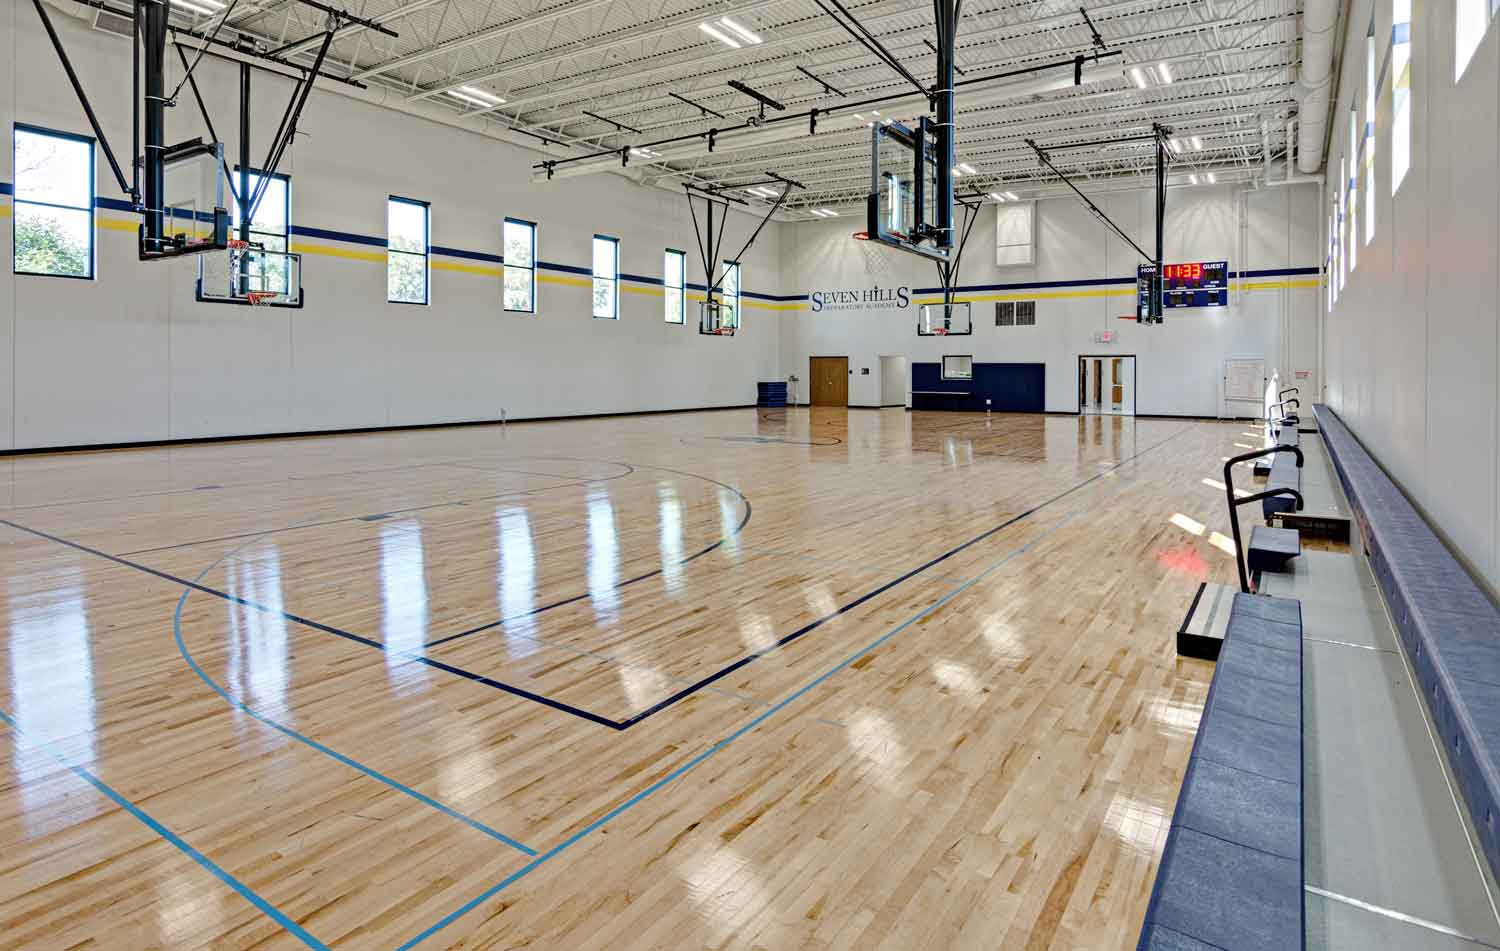 School gym architecture done by local Minneapolis architect Framework Architects